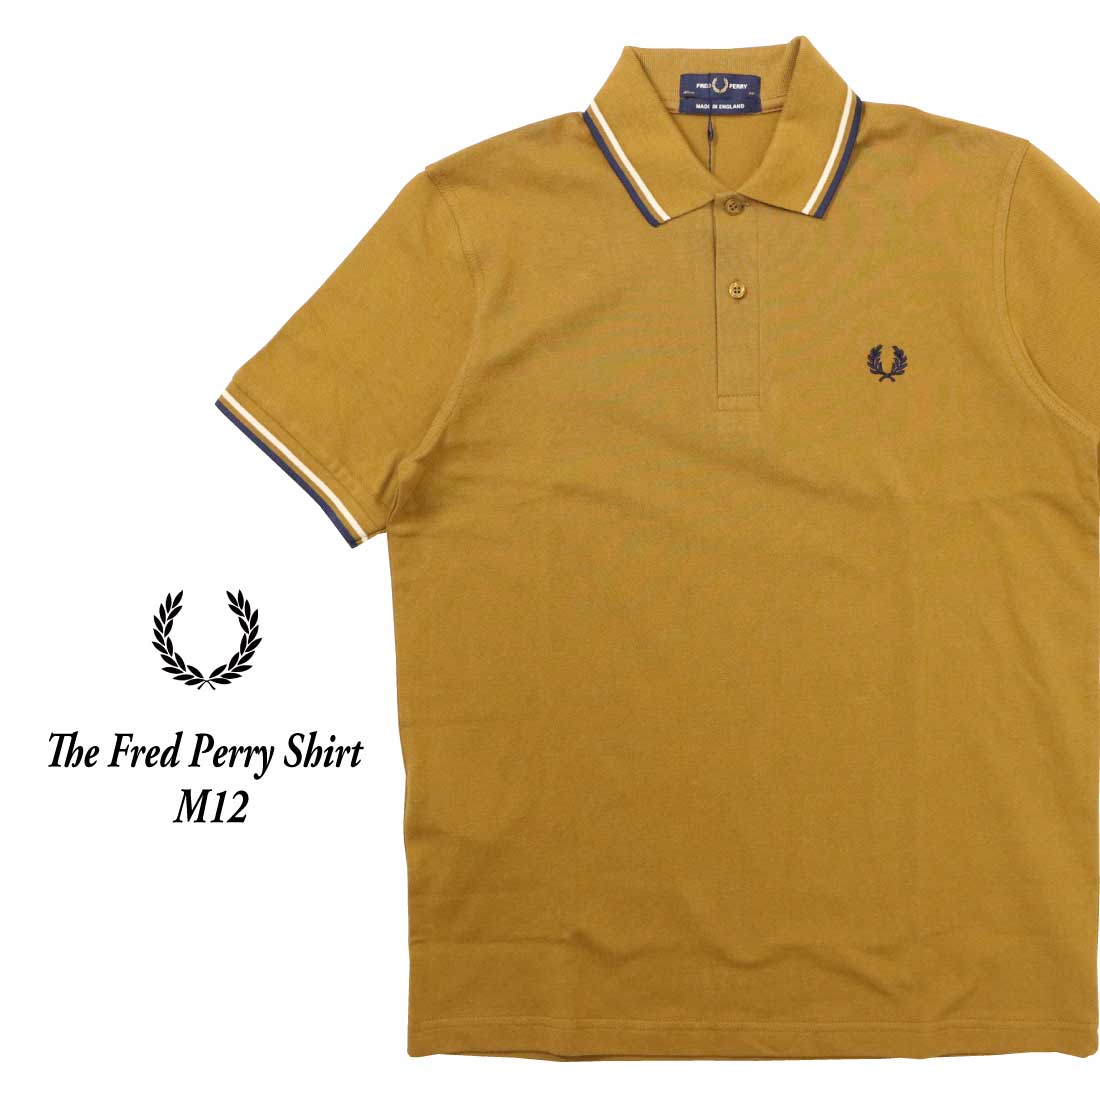 FRED PERRY 半袖 ポロシャツ The Fred Perry Shirt M12 ティップラ...